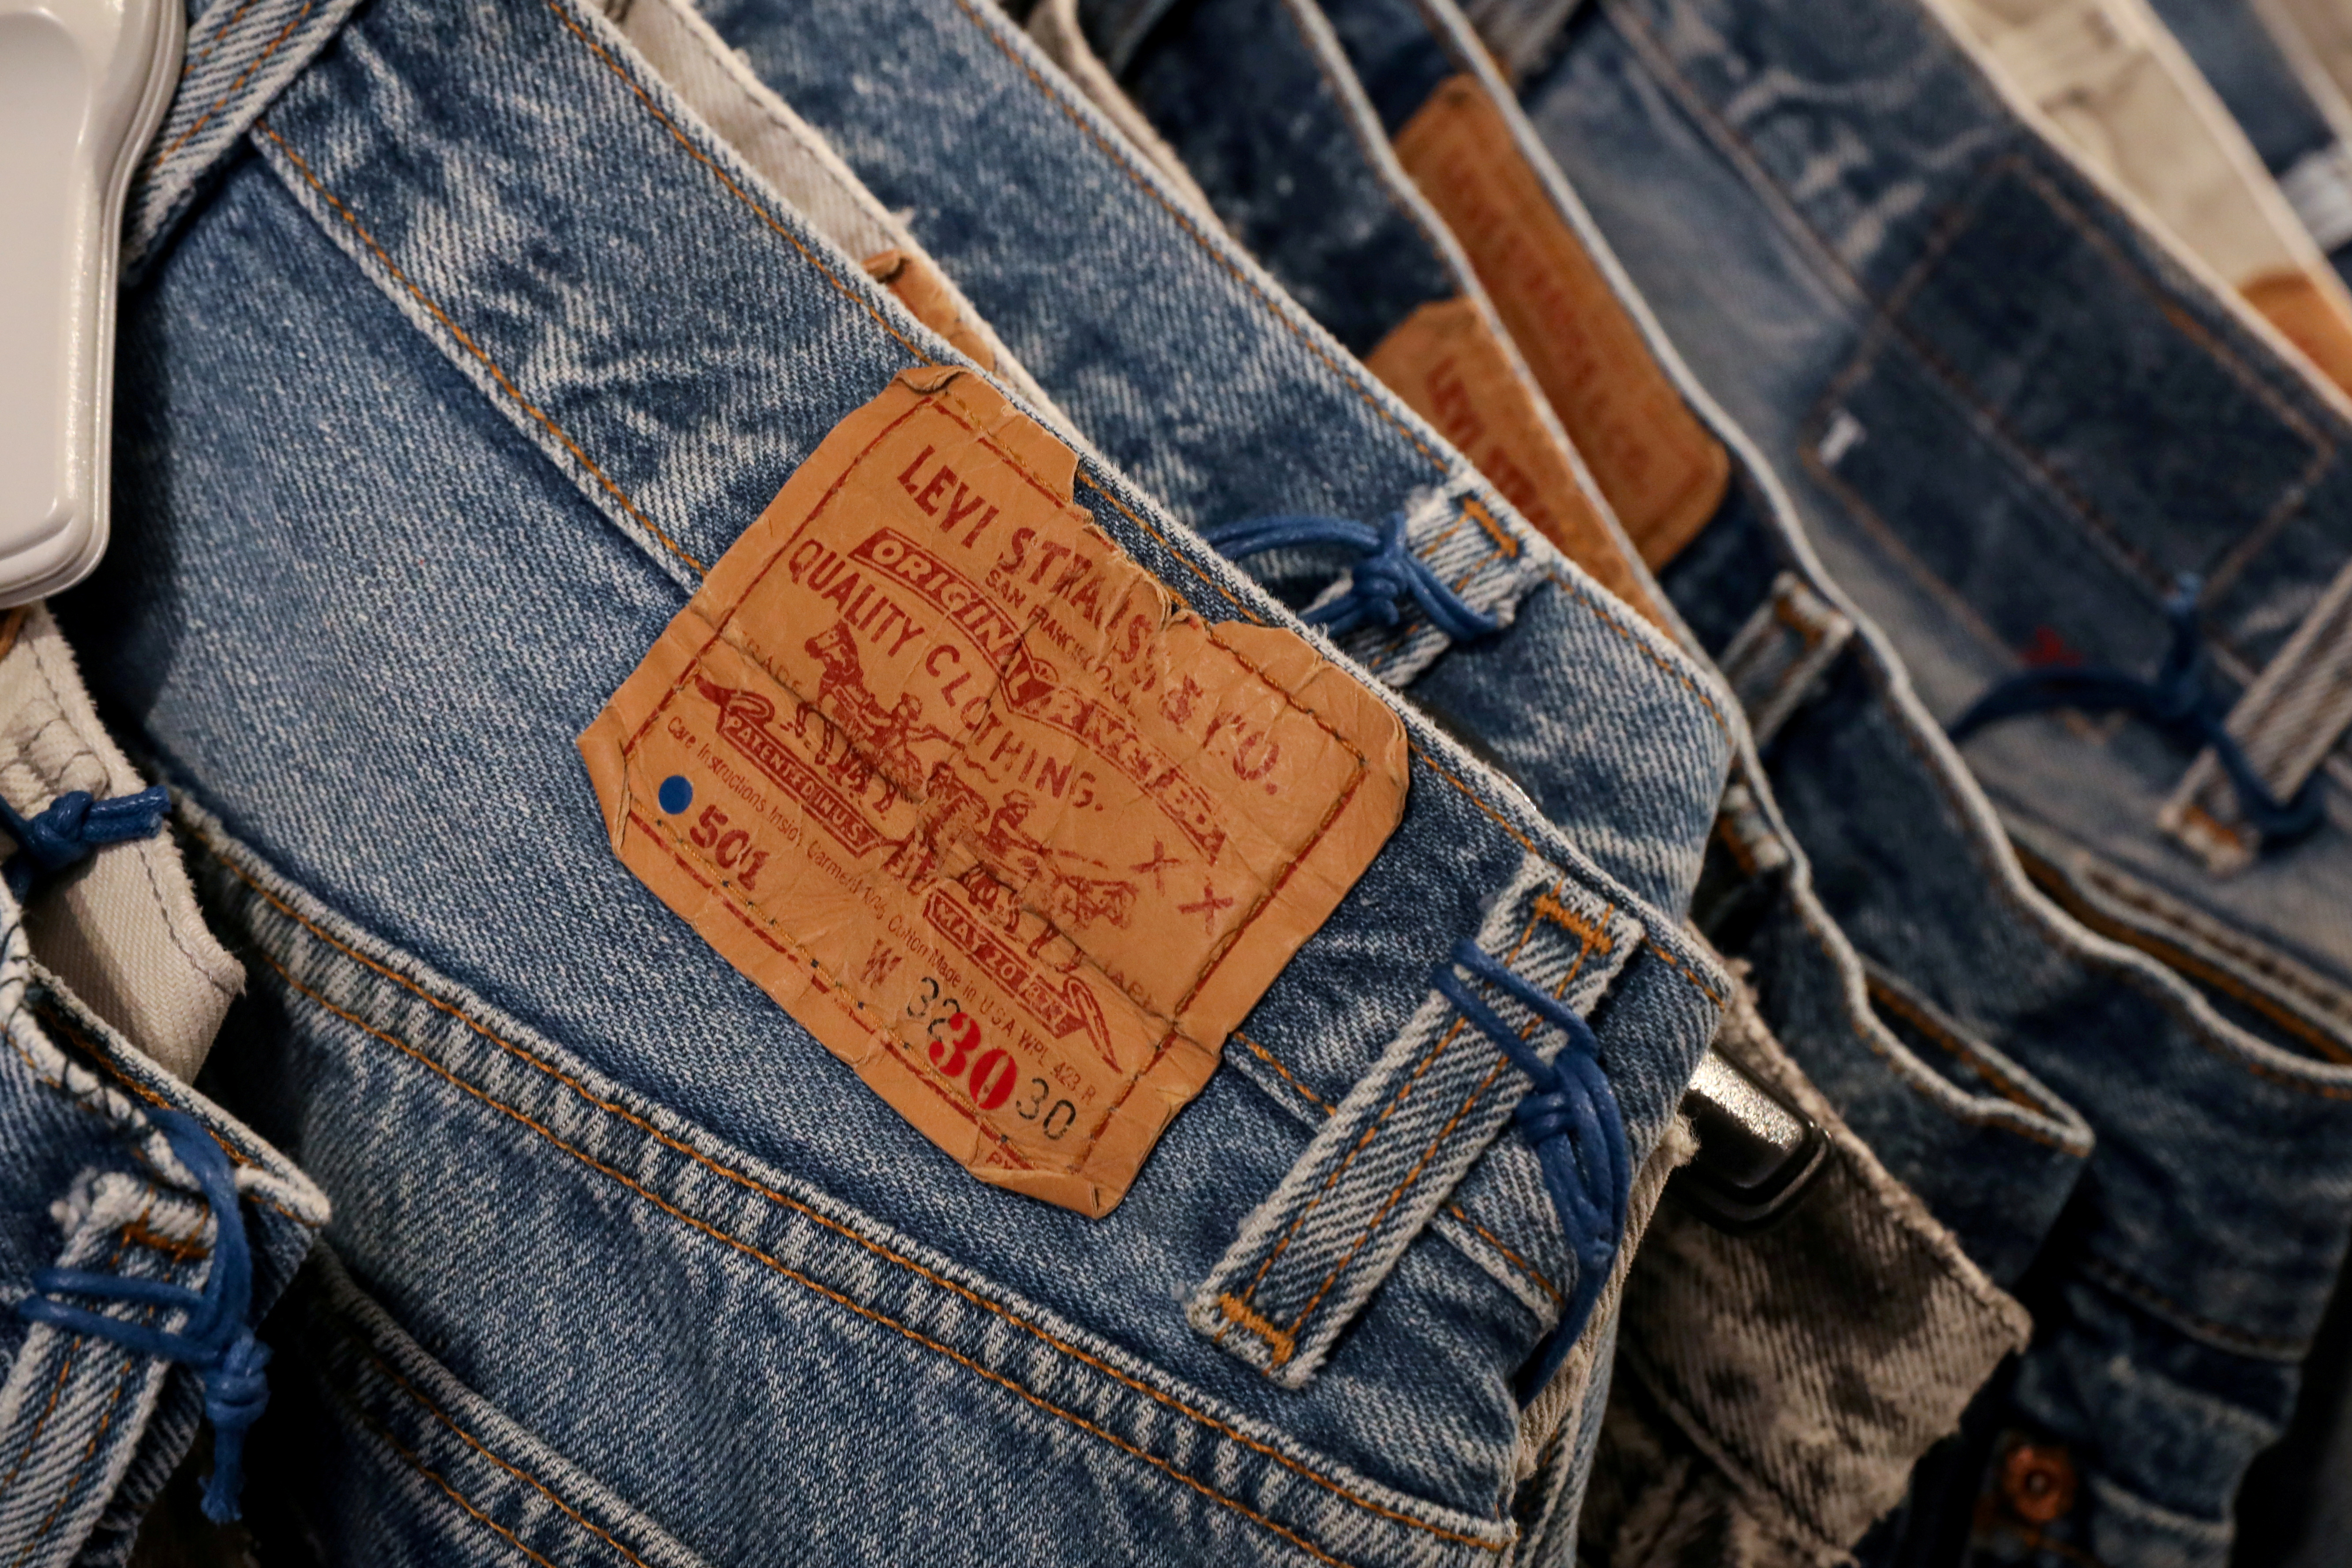 The Levi's tag is seen on pants hanging in a Levi Strauss store in New York